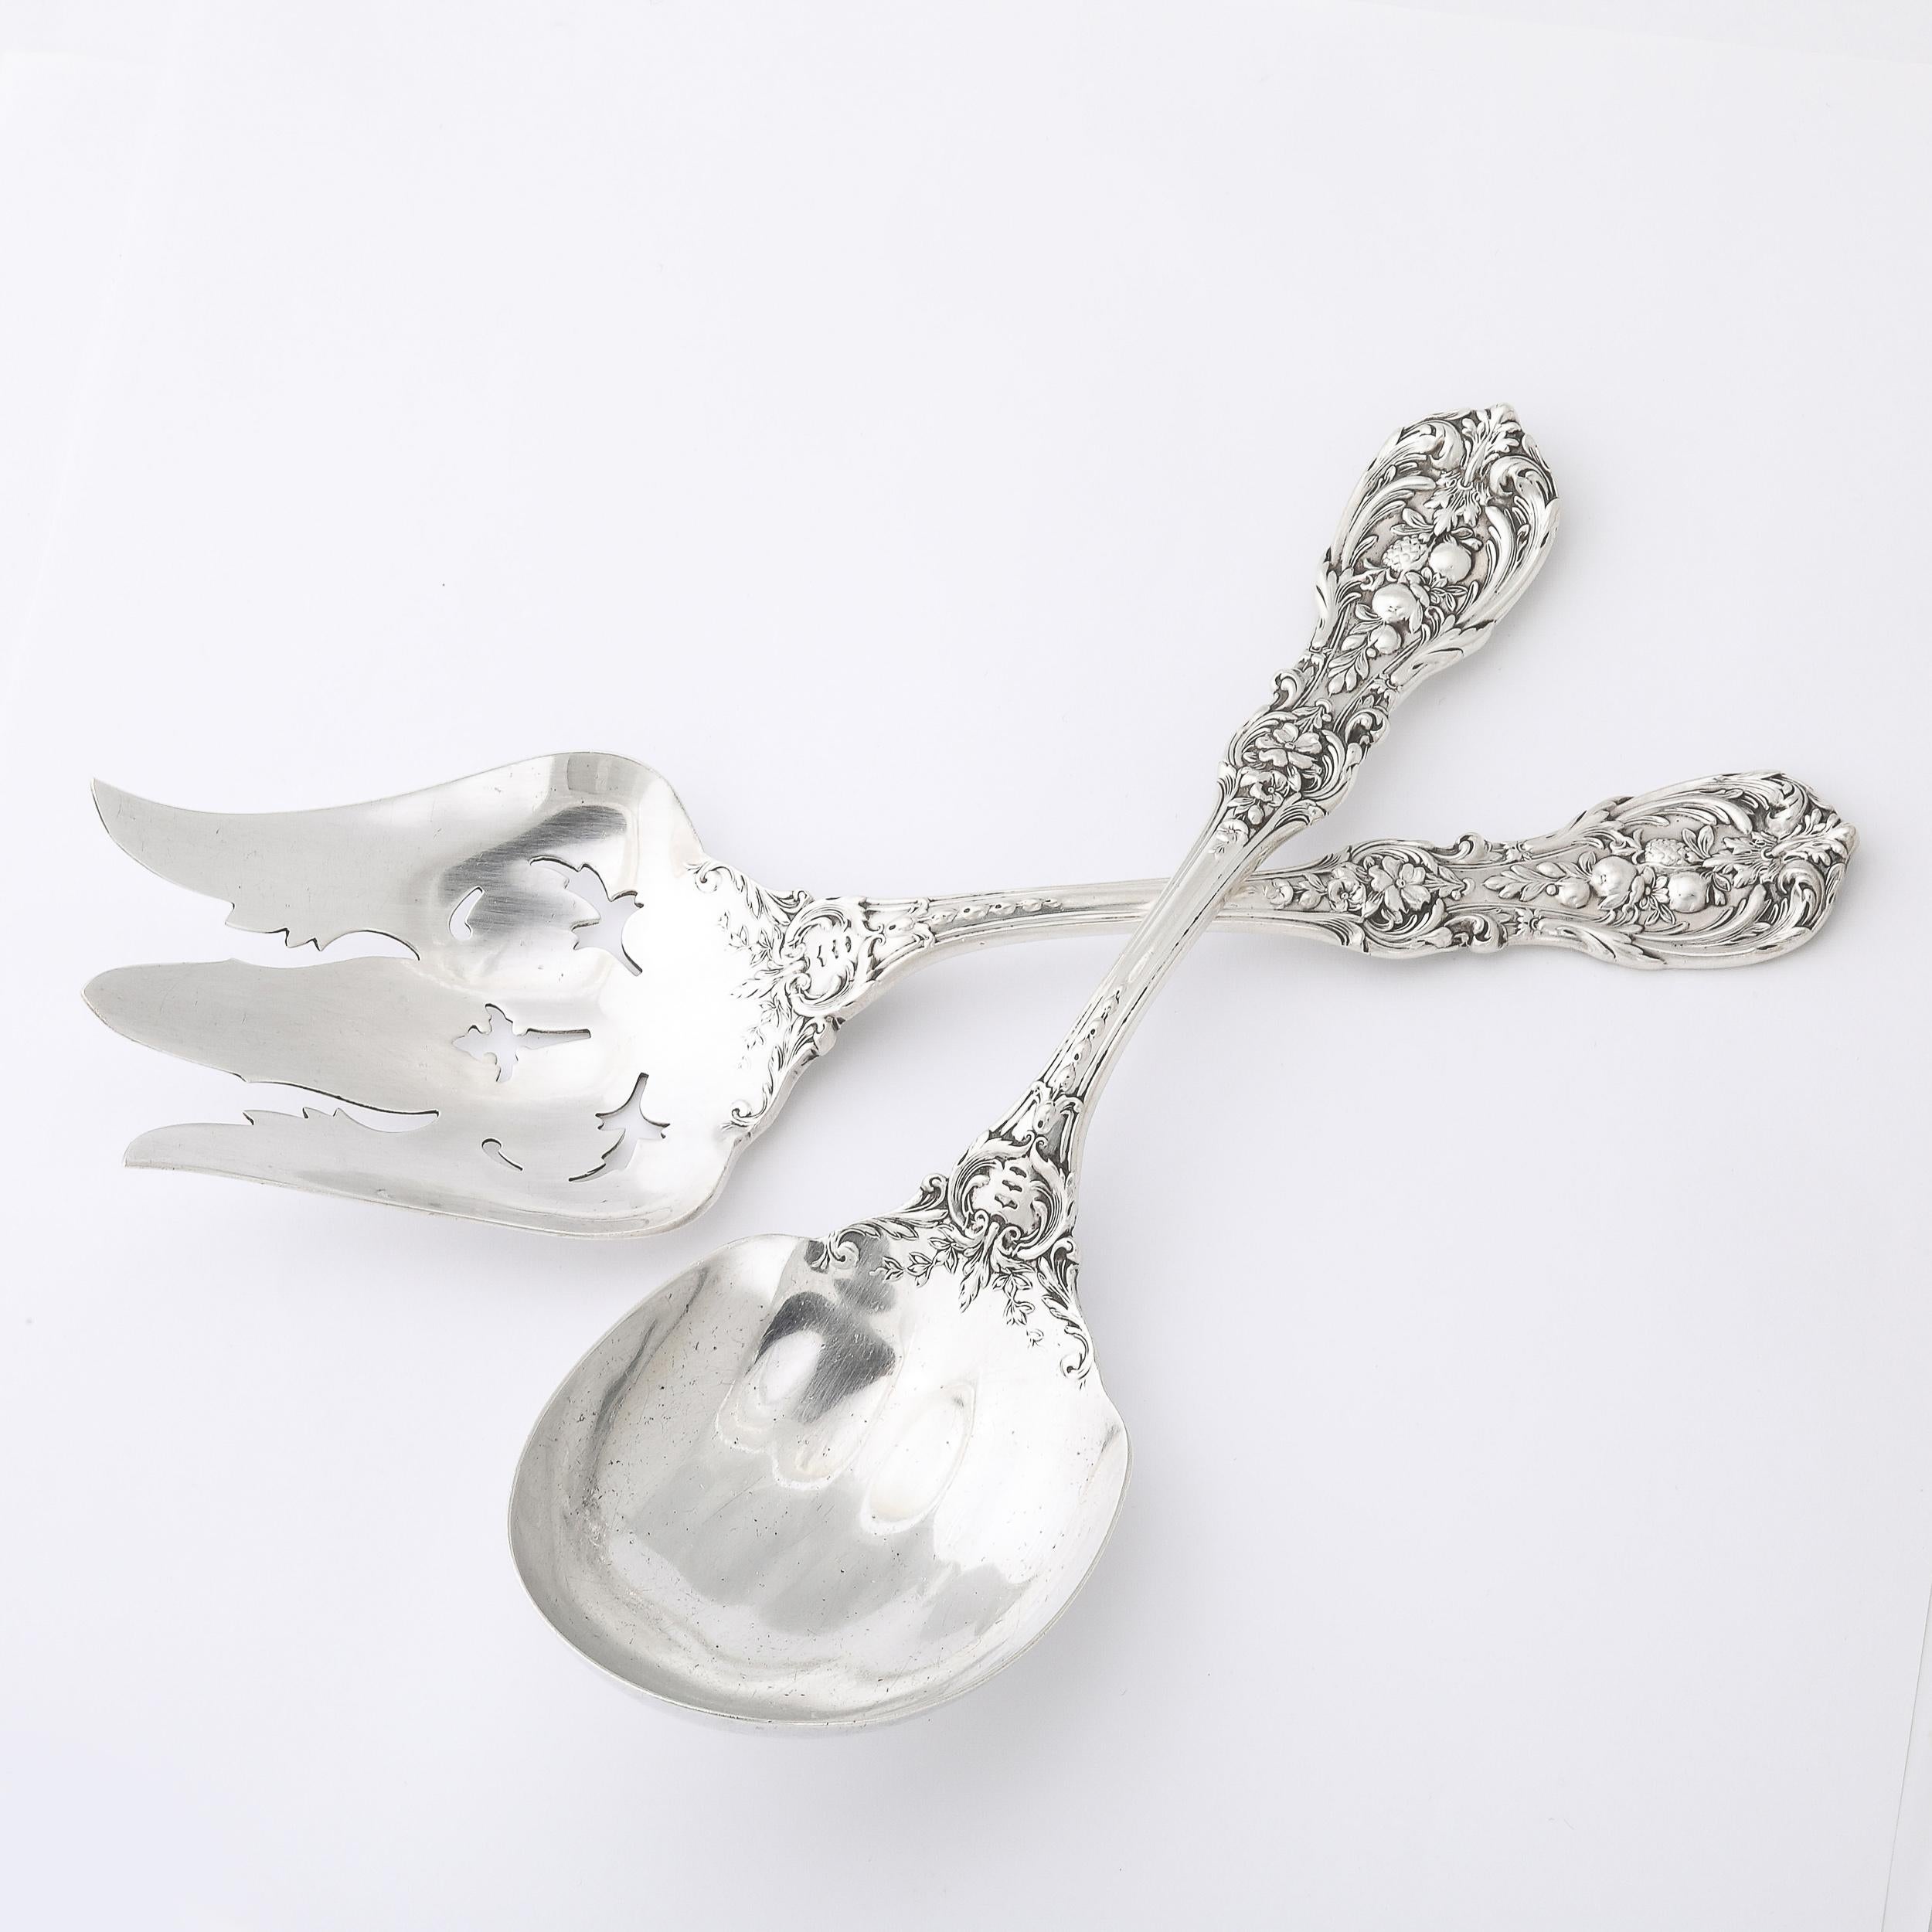 This beautifully detailed and well balanced Reed and Barton Francis I Pattern Sterling Silver Serving Spoon & Fork Set originates from the United States, Circa 1950. Features a lovely profile complimenting one another functionally and visually, this